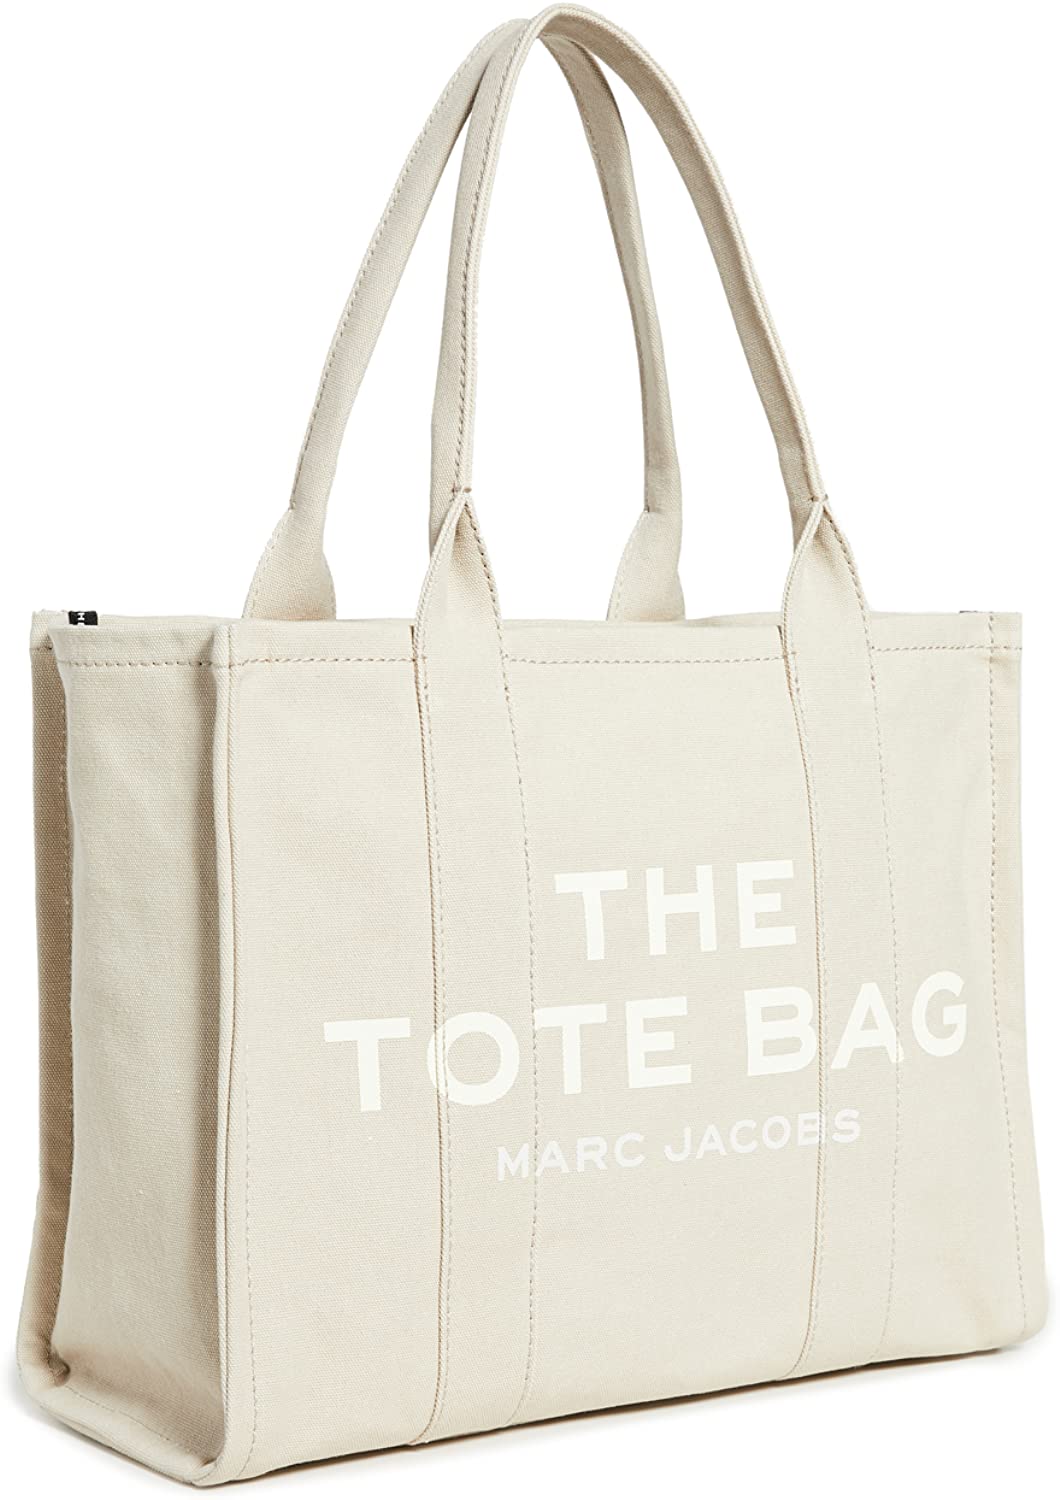 Best The Tote Bag Marc Jacobs – February 2023